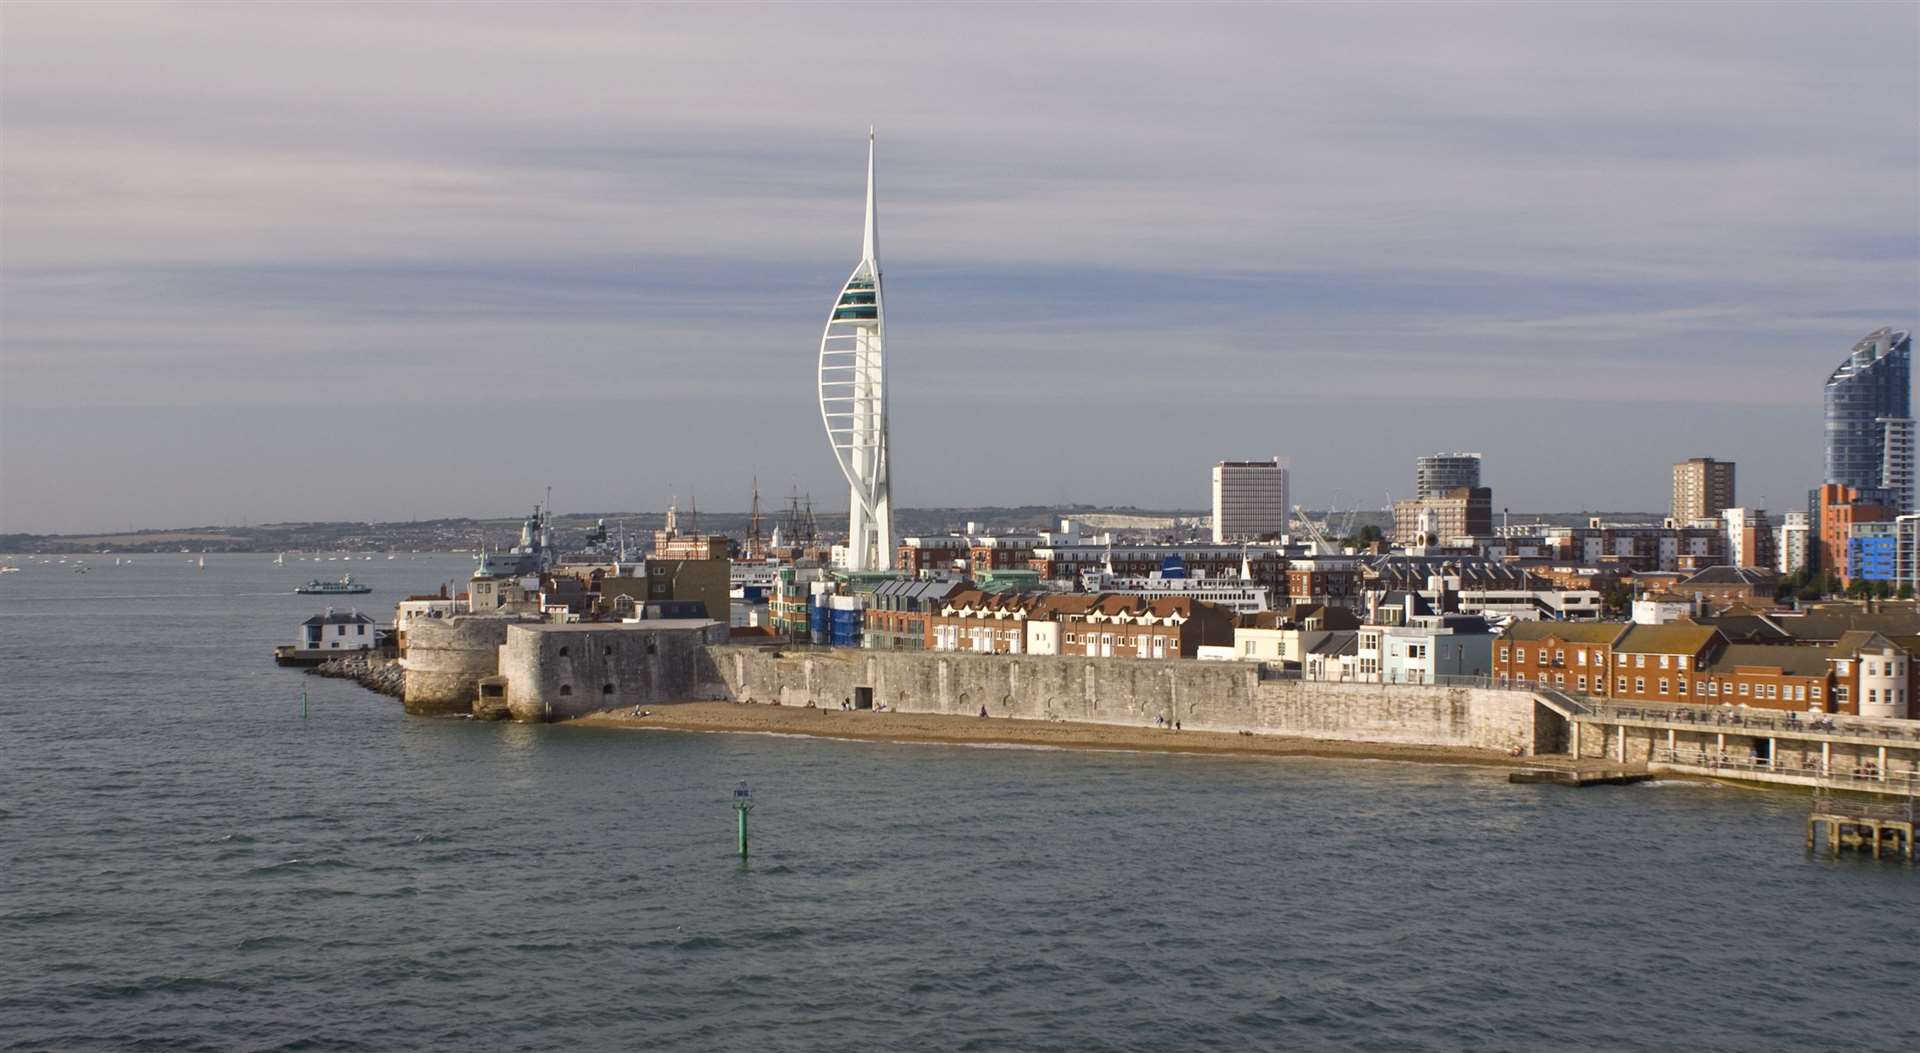 ICONIC: The Emirates Spinnaker Tower in Portsmouth